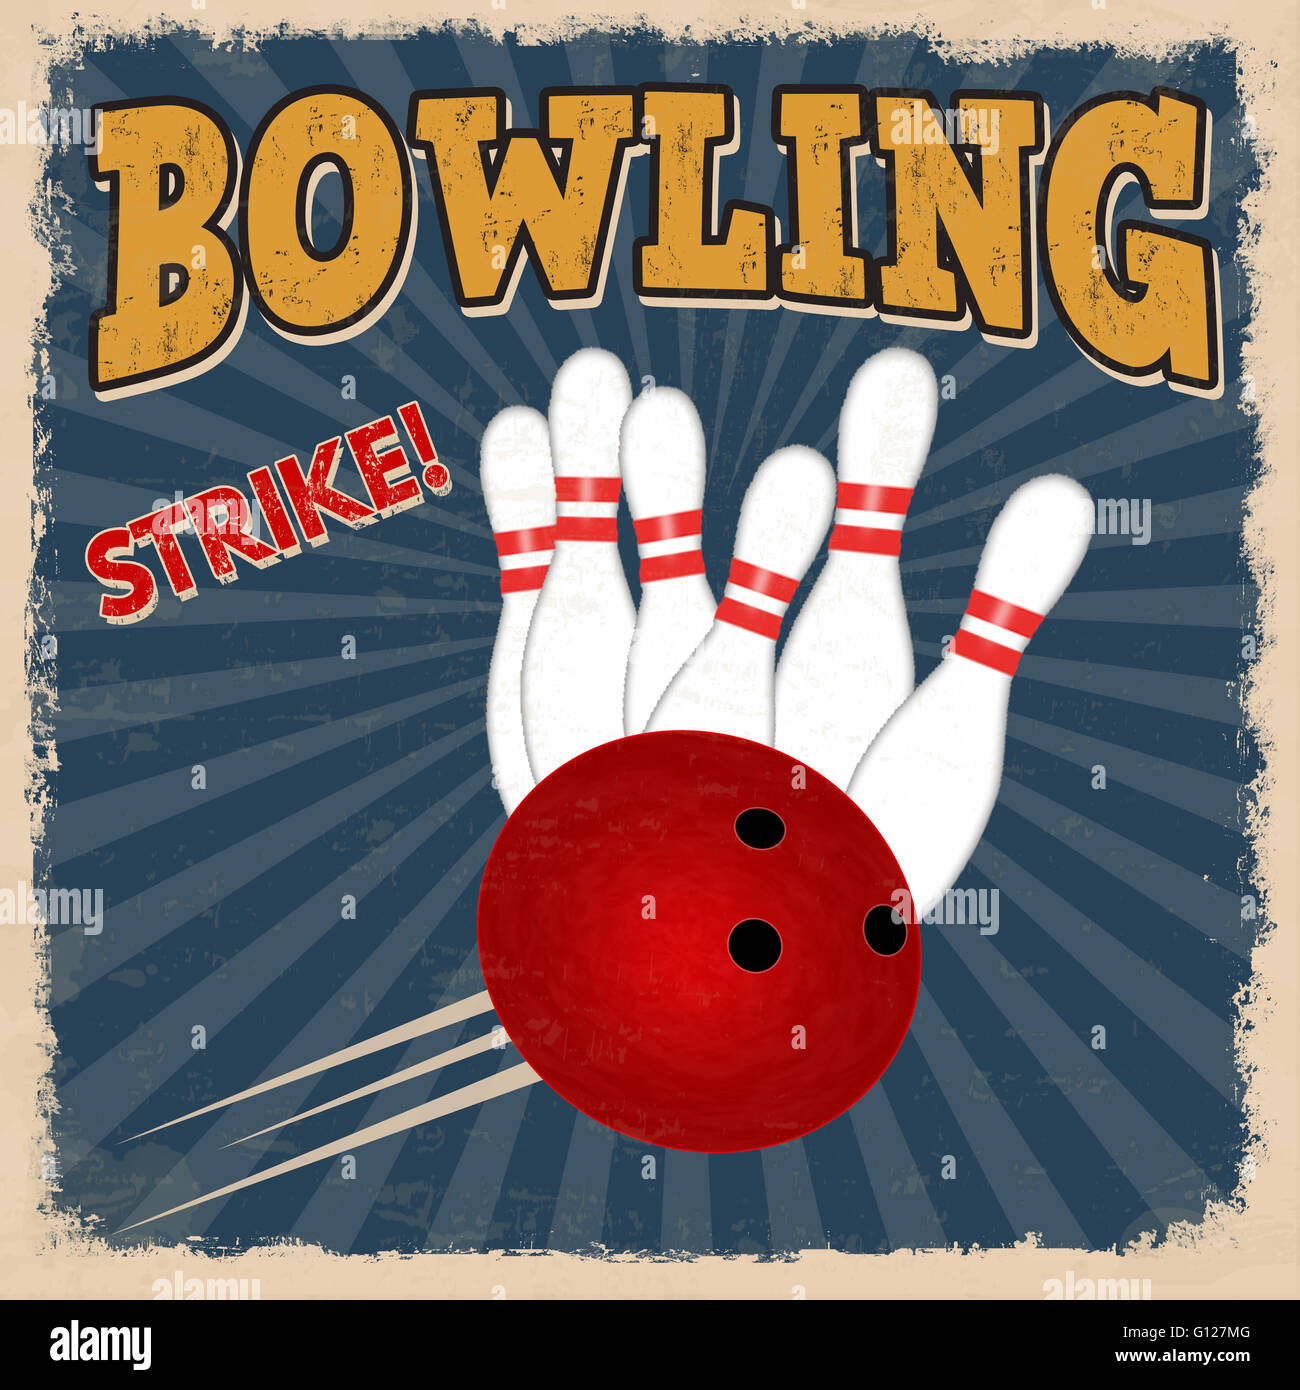 Bowling retro poster design template on blue background, vector illustration Stock Photo